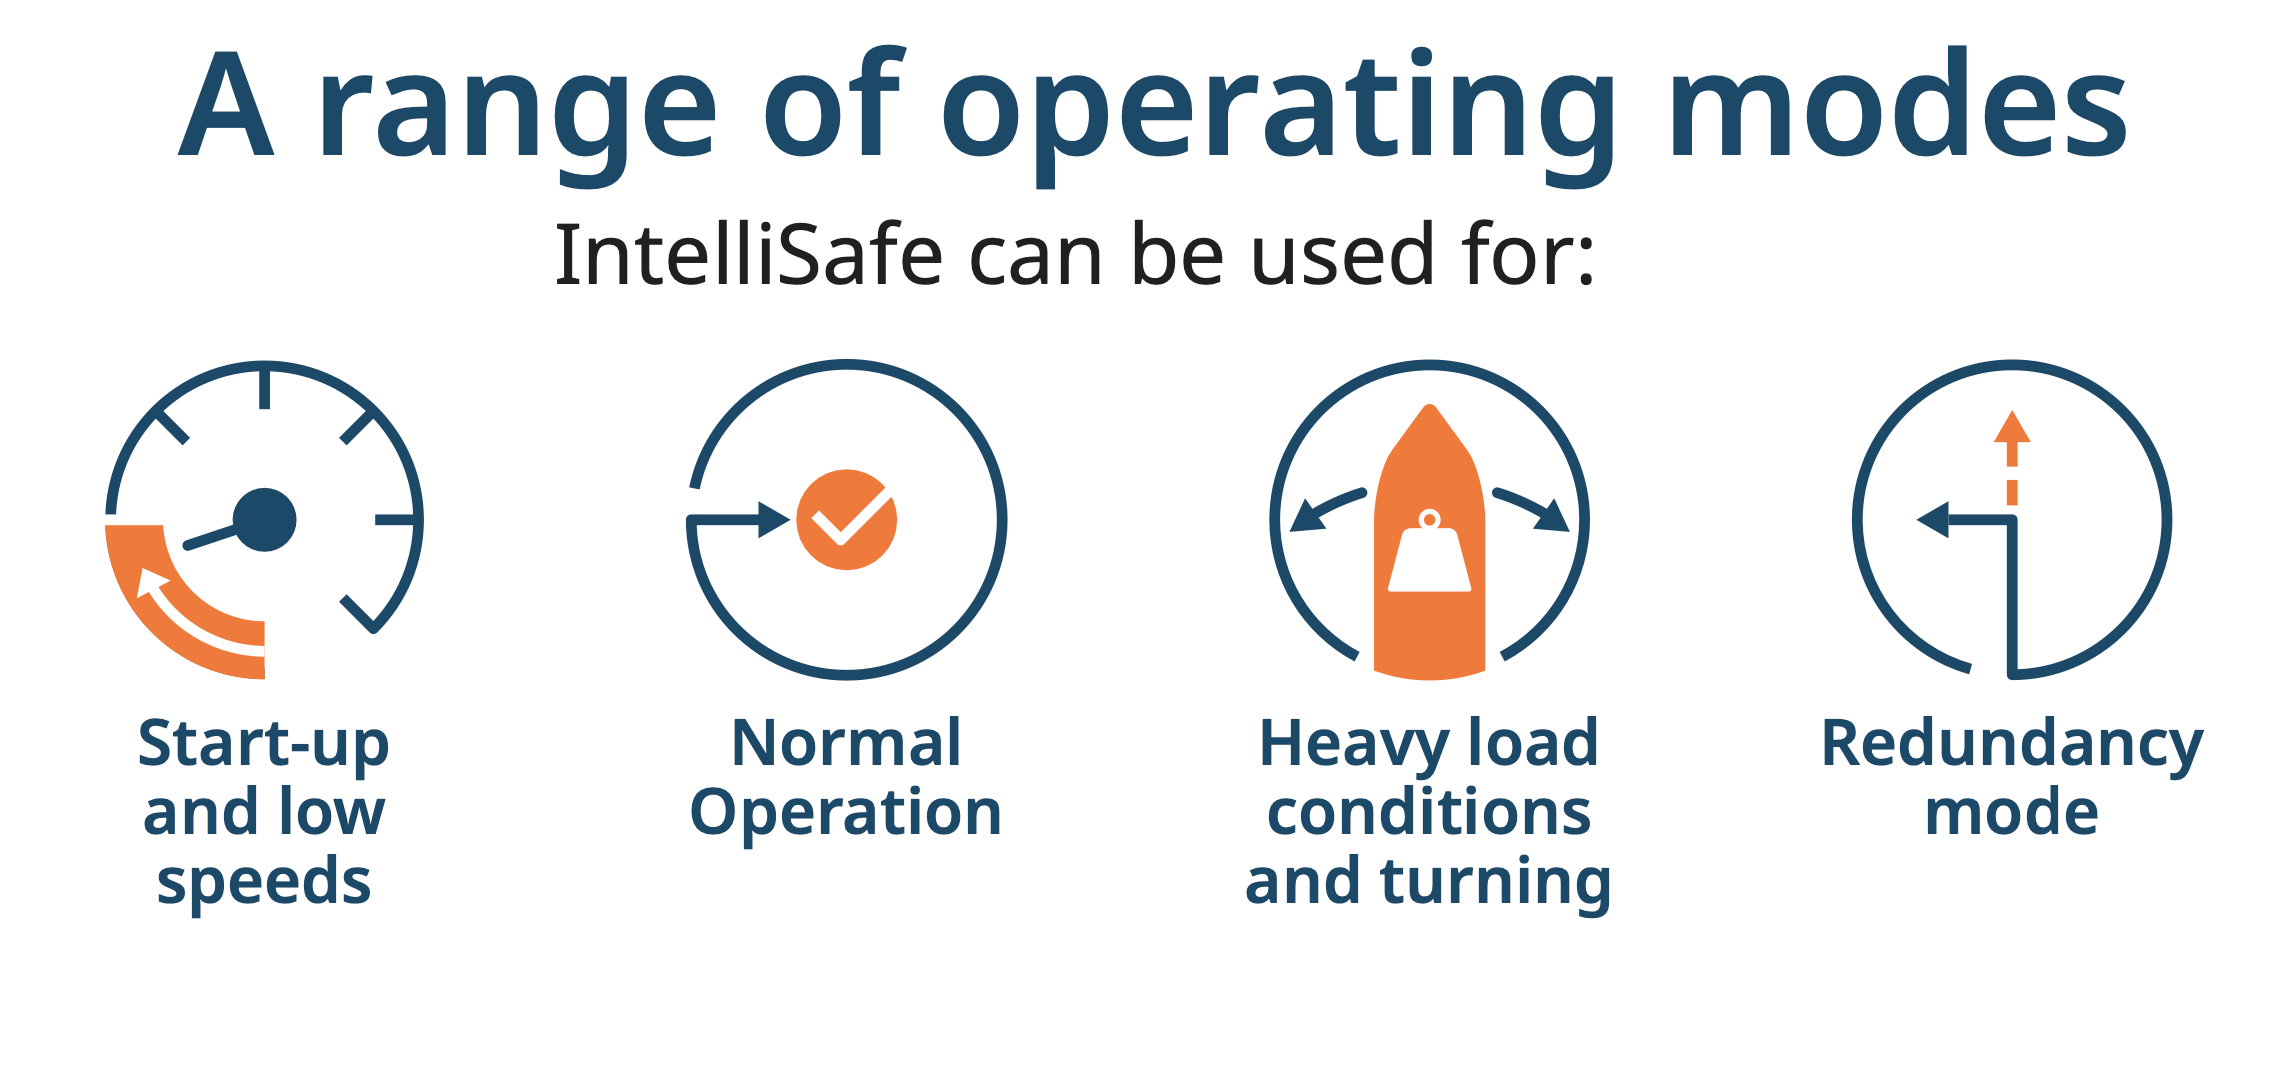 IntelliSafe is able to operate in multiple different operating modes including start-up, low speeds, and heavy-load conditions and turning.